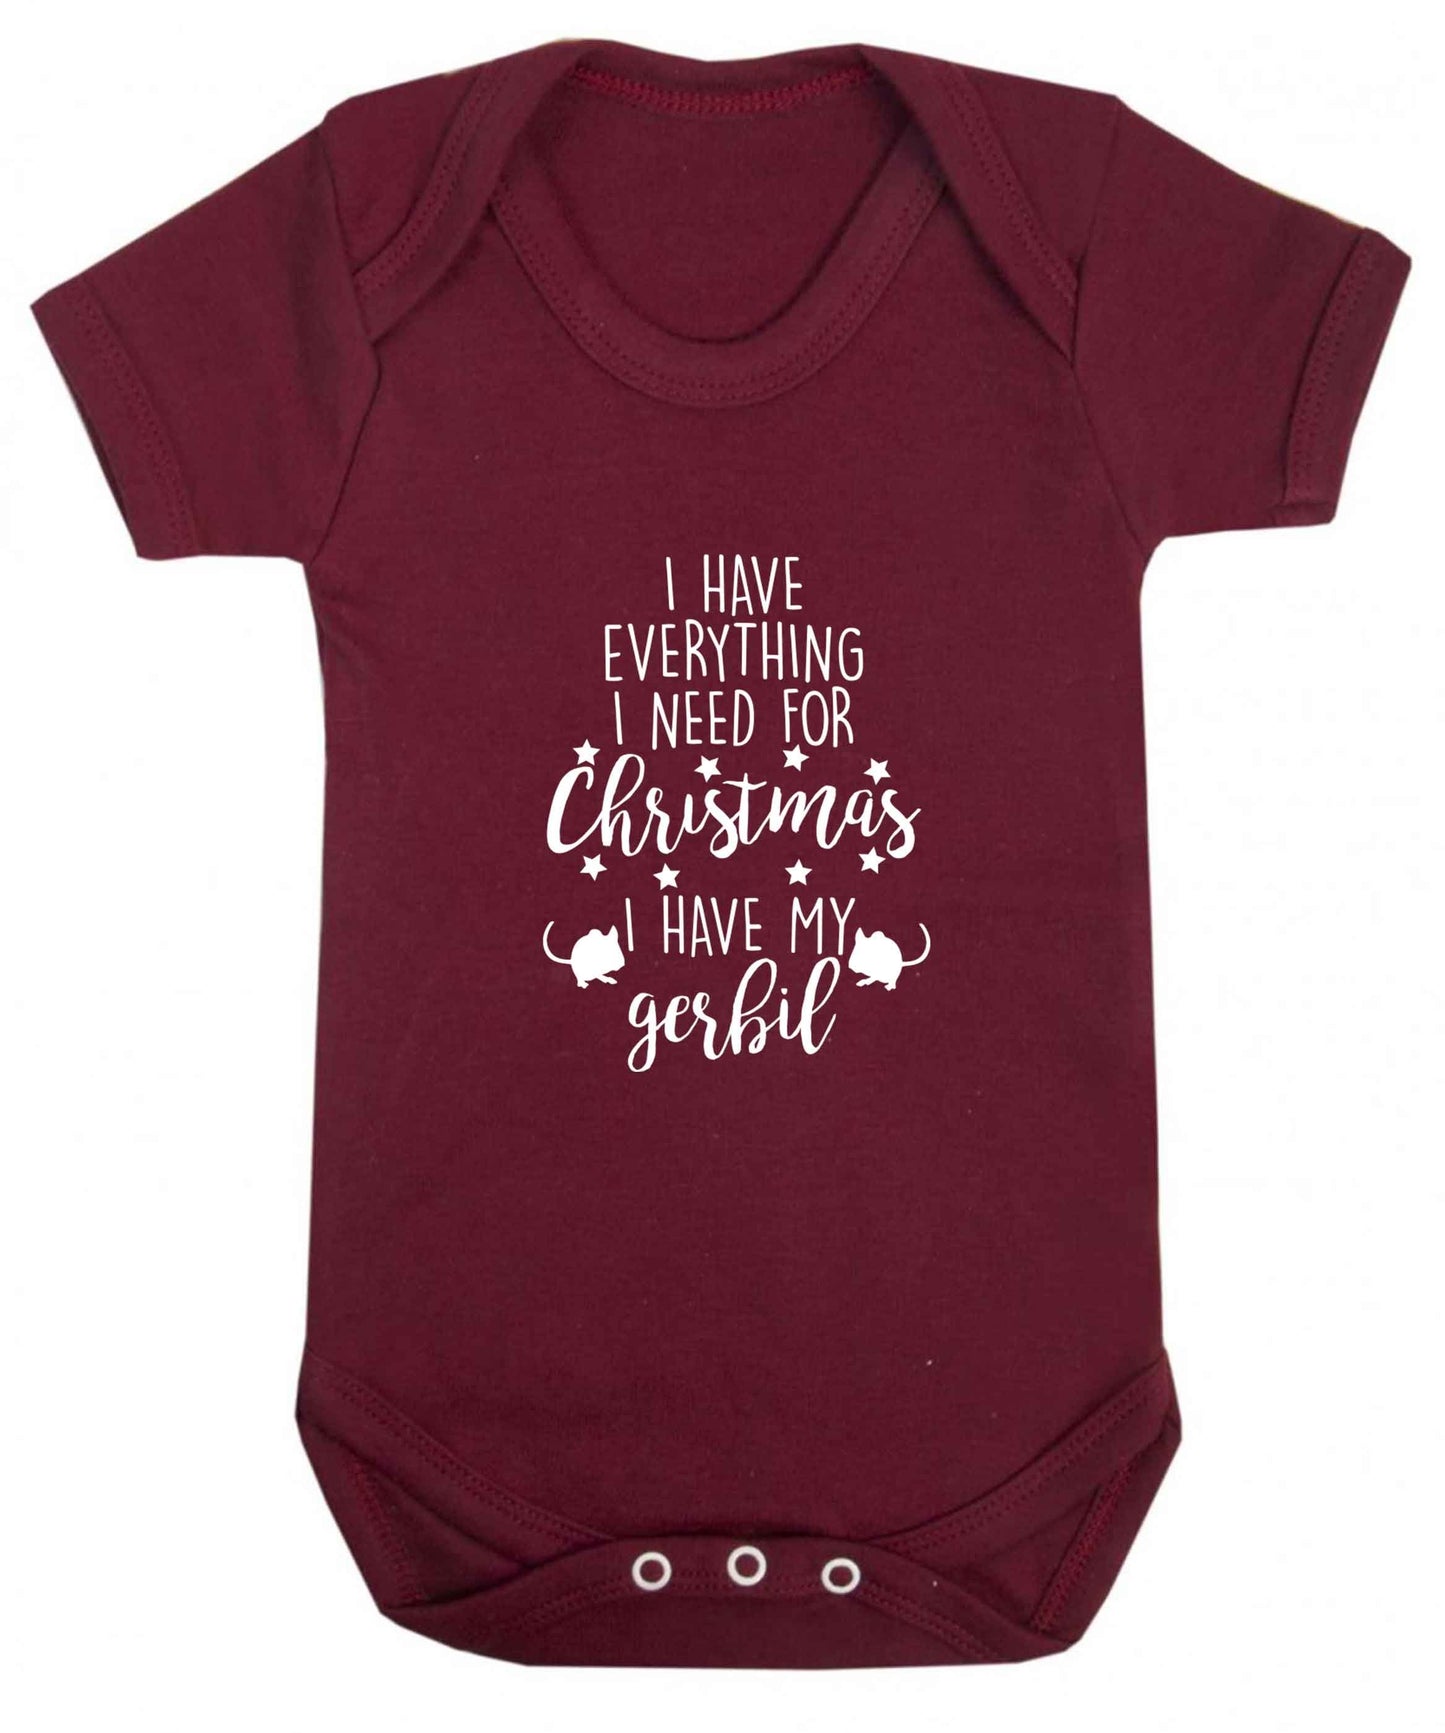 I have everything I need for Christmas I have my gerbil baby vest maroon 18-24 months